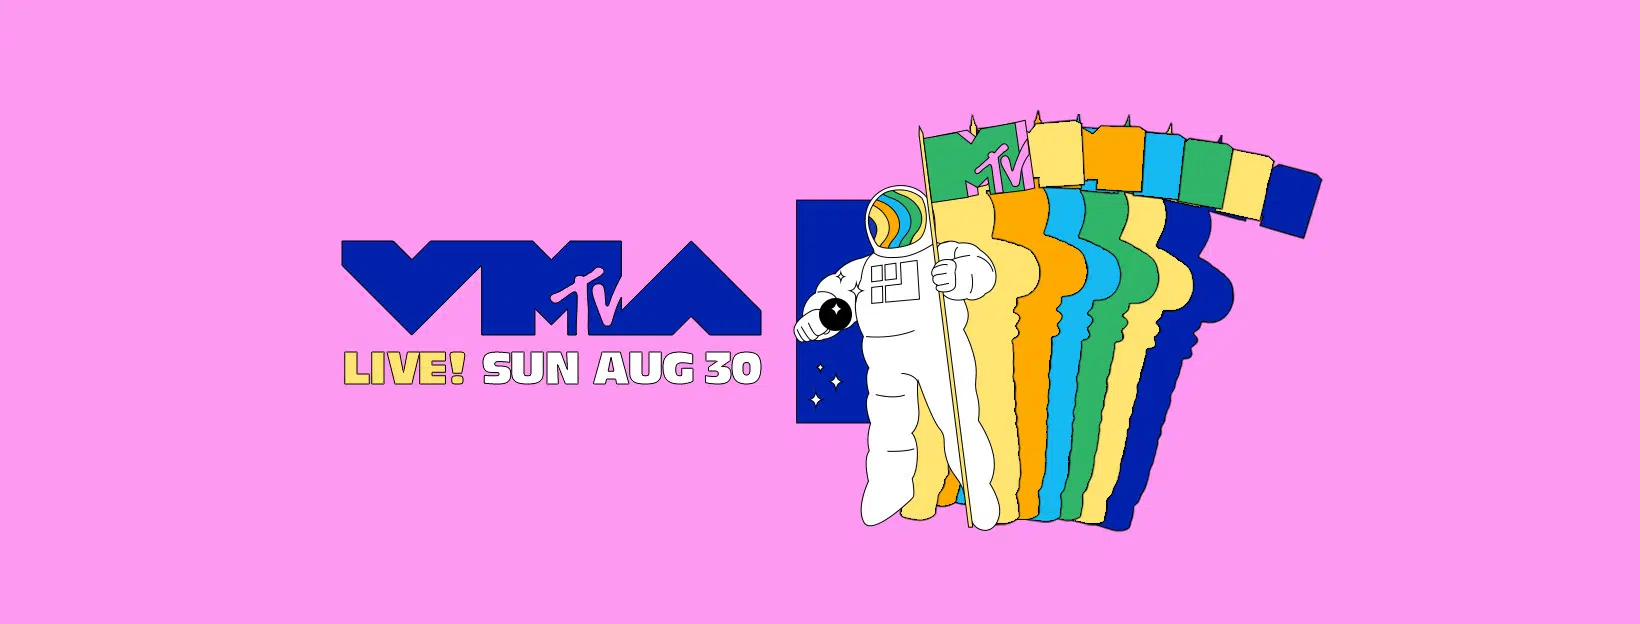 Roddy Ricch and J Balvin Have Pulled Out From The #VMAs